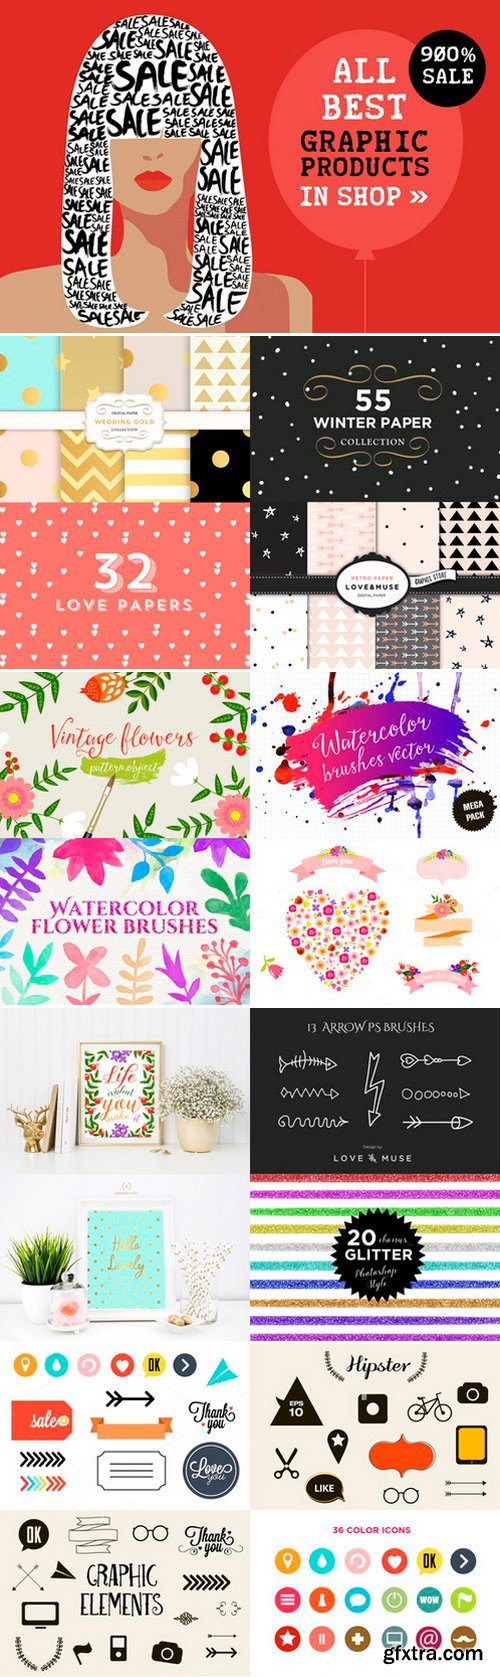 CreativeMarket - Best Graphic Products 407810